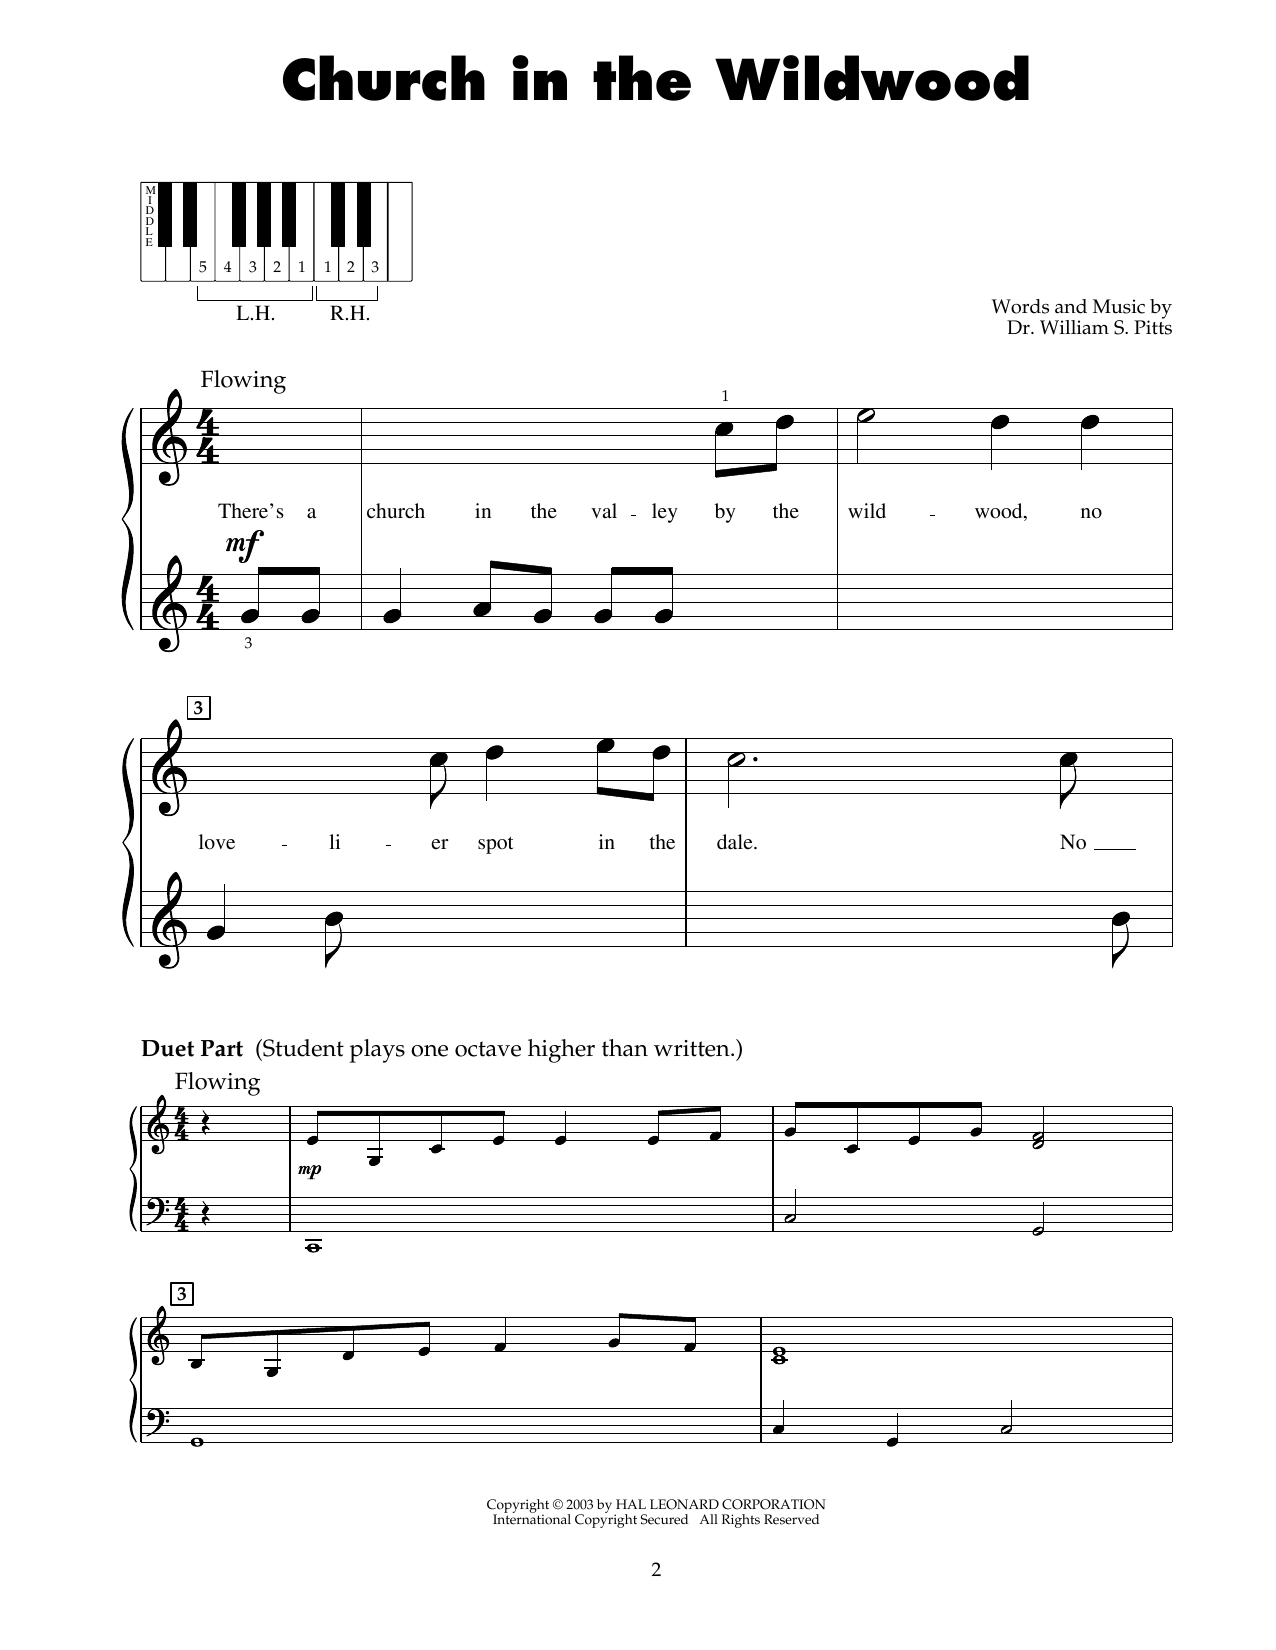 Download Dr. William S. Pitts Church In The Wildwood Sheet Music